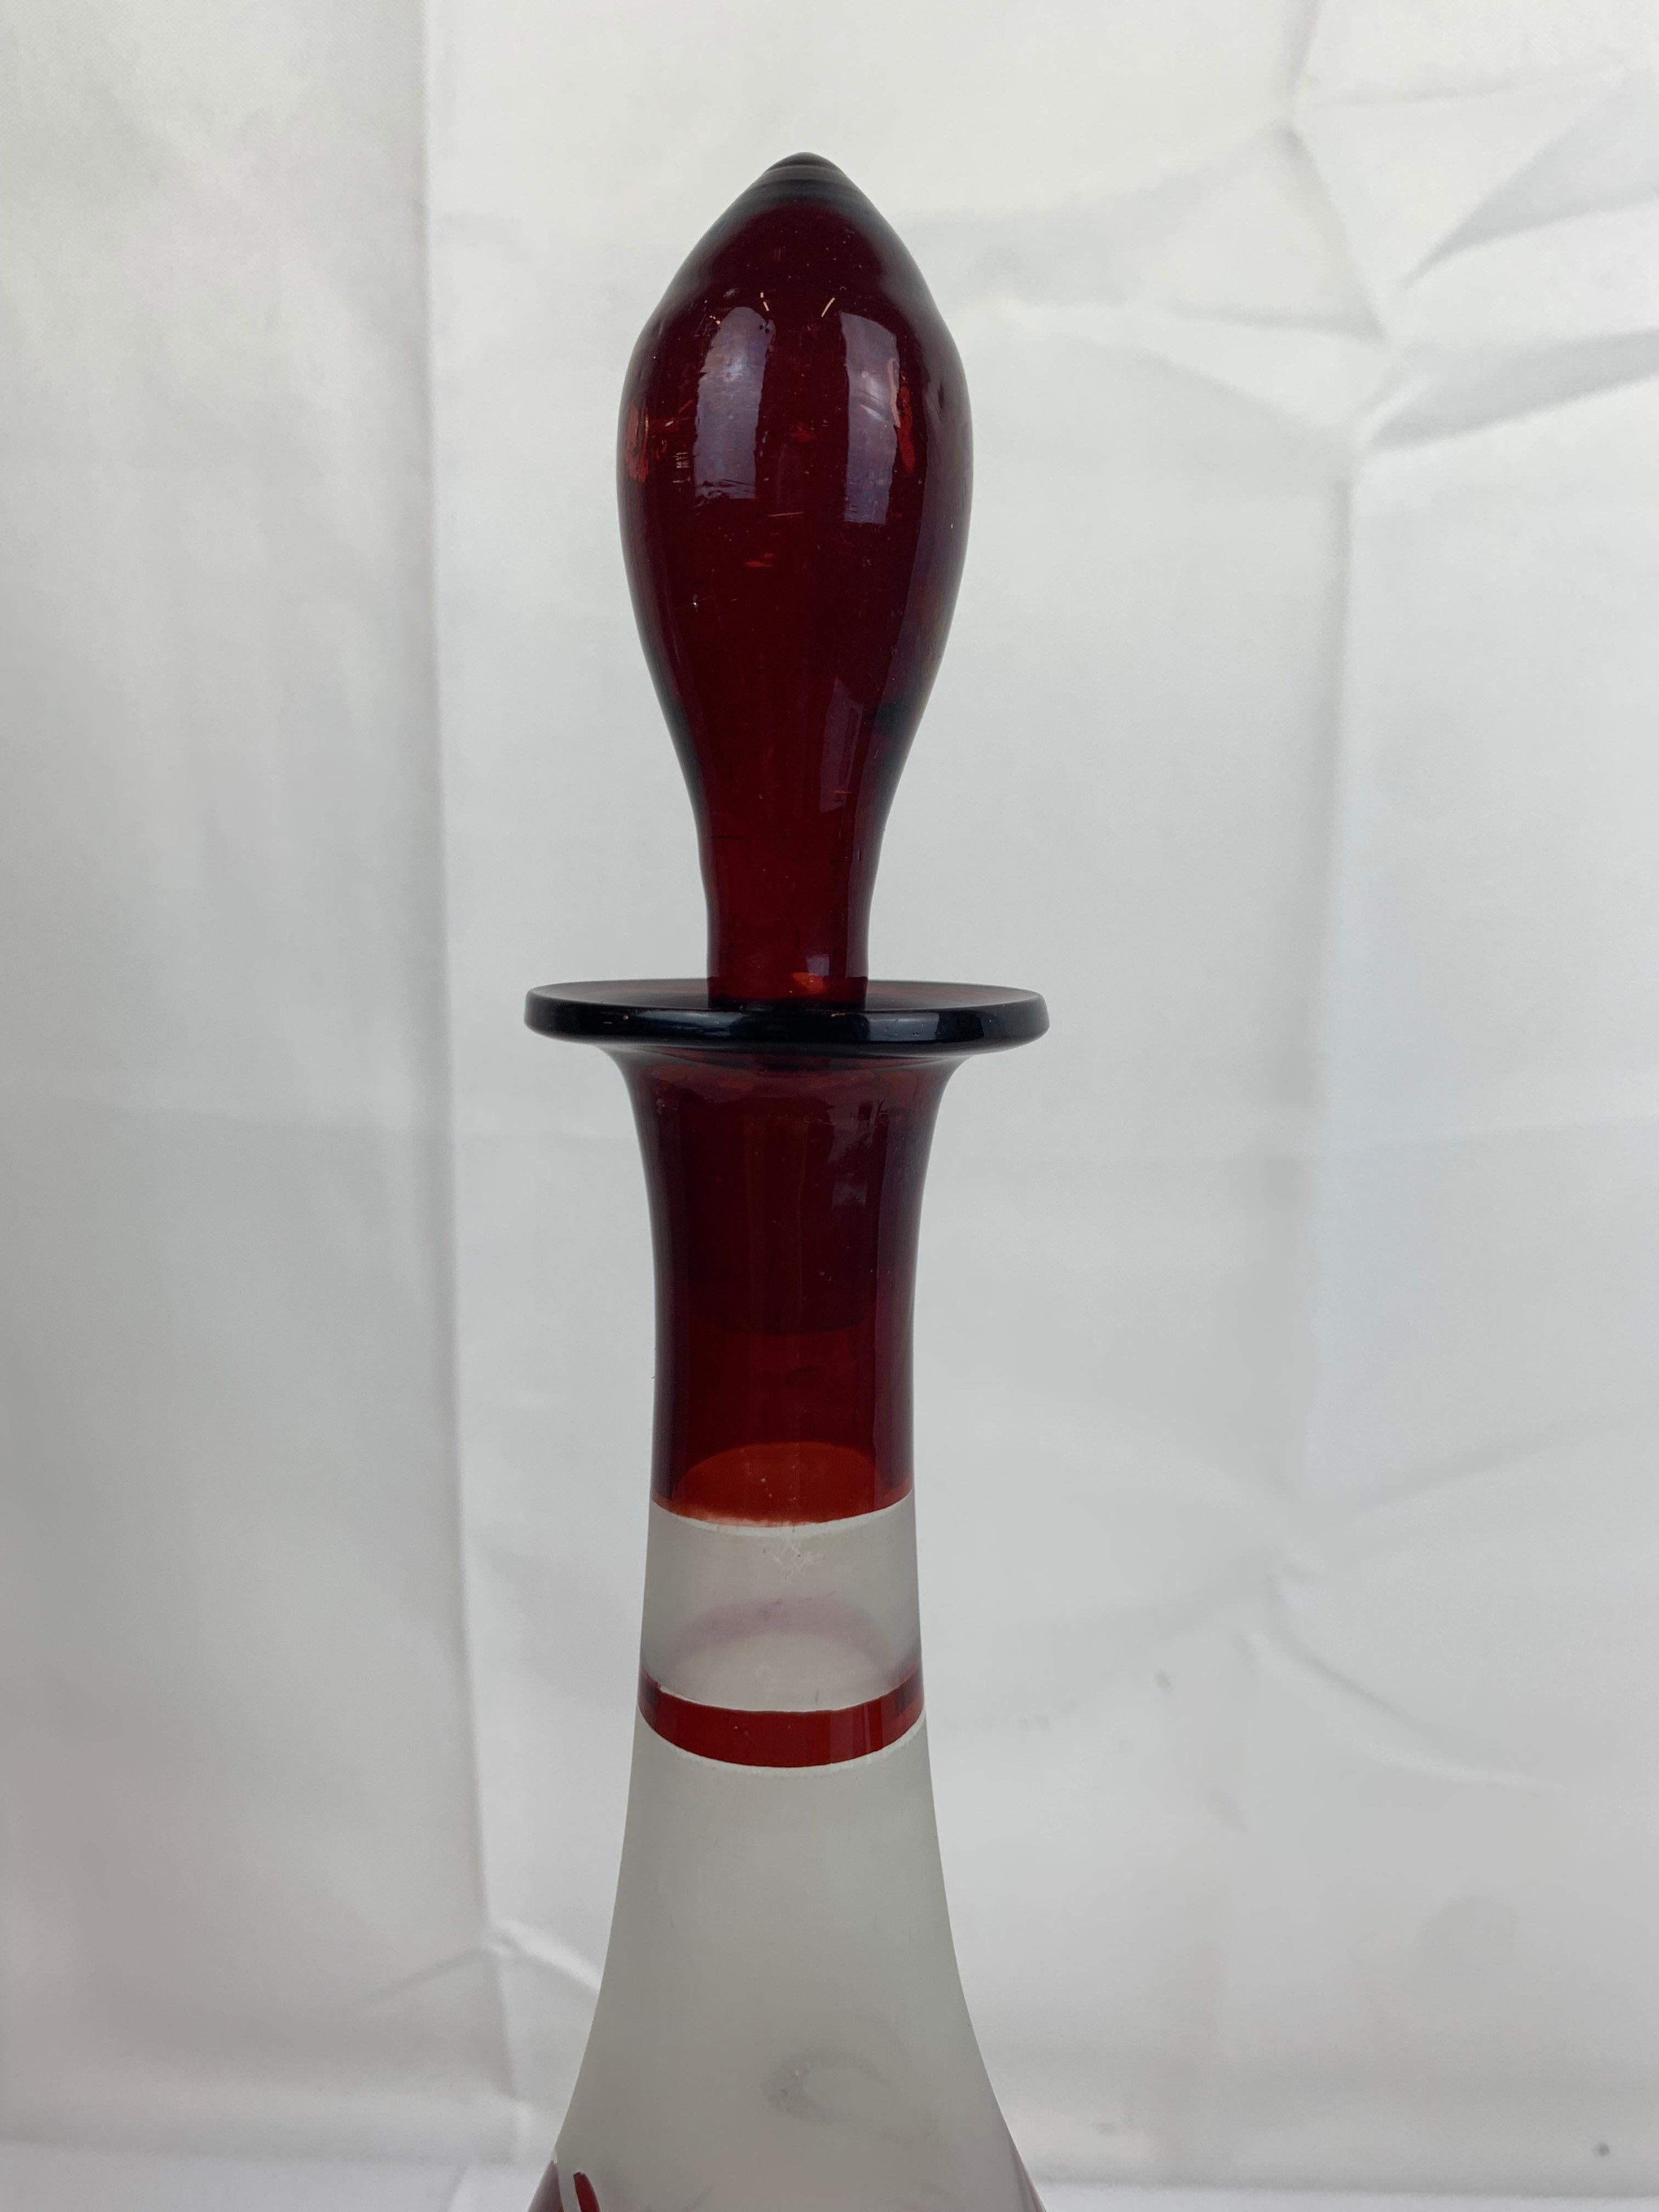 Ruby red wine decanter handsomely hand painted on a frosted clear glass. The decoration of swags tied with bows and morning doves is done with what is called 